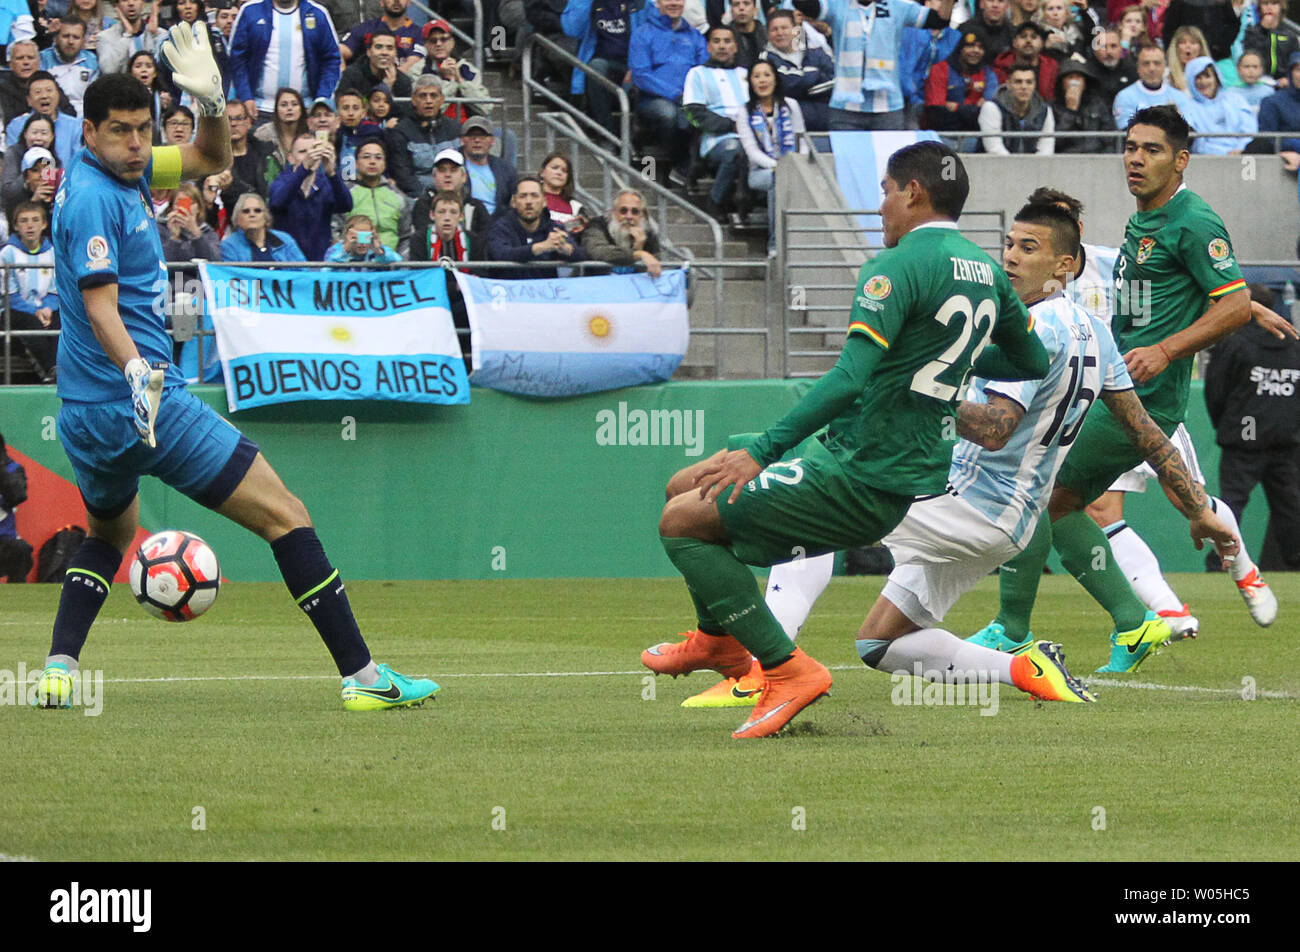 Argentina's Erik Lamela (15) boots the ball past Bolivia's goalie Carlos Lampe , left,  to score a goal in the first half in the 2016 Copa America Centenario soccer match at CenturyLink Field in Seattle, Washington on June 14, 2016.  Argentina beat Bolivia 3-0.   Photo by Jim Bryant/ UPI Stock Photo